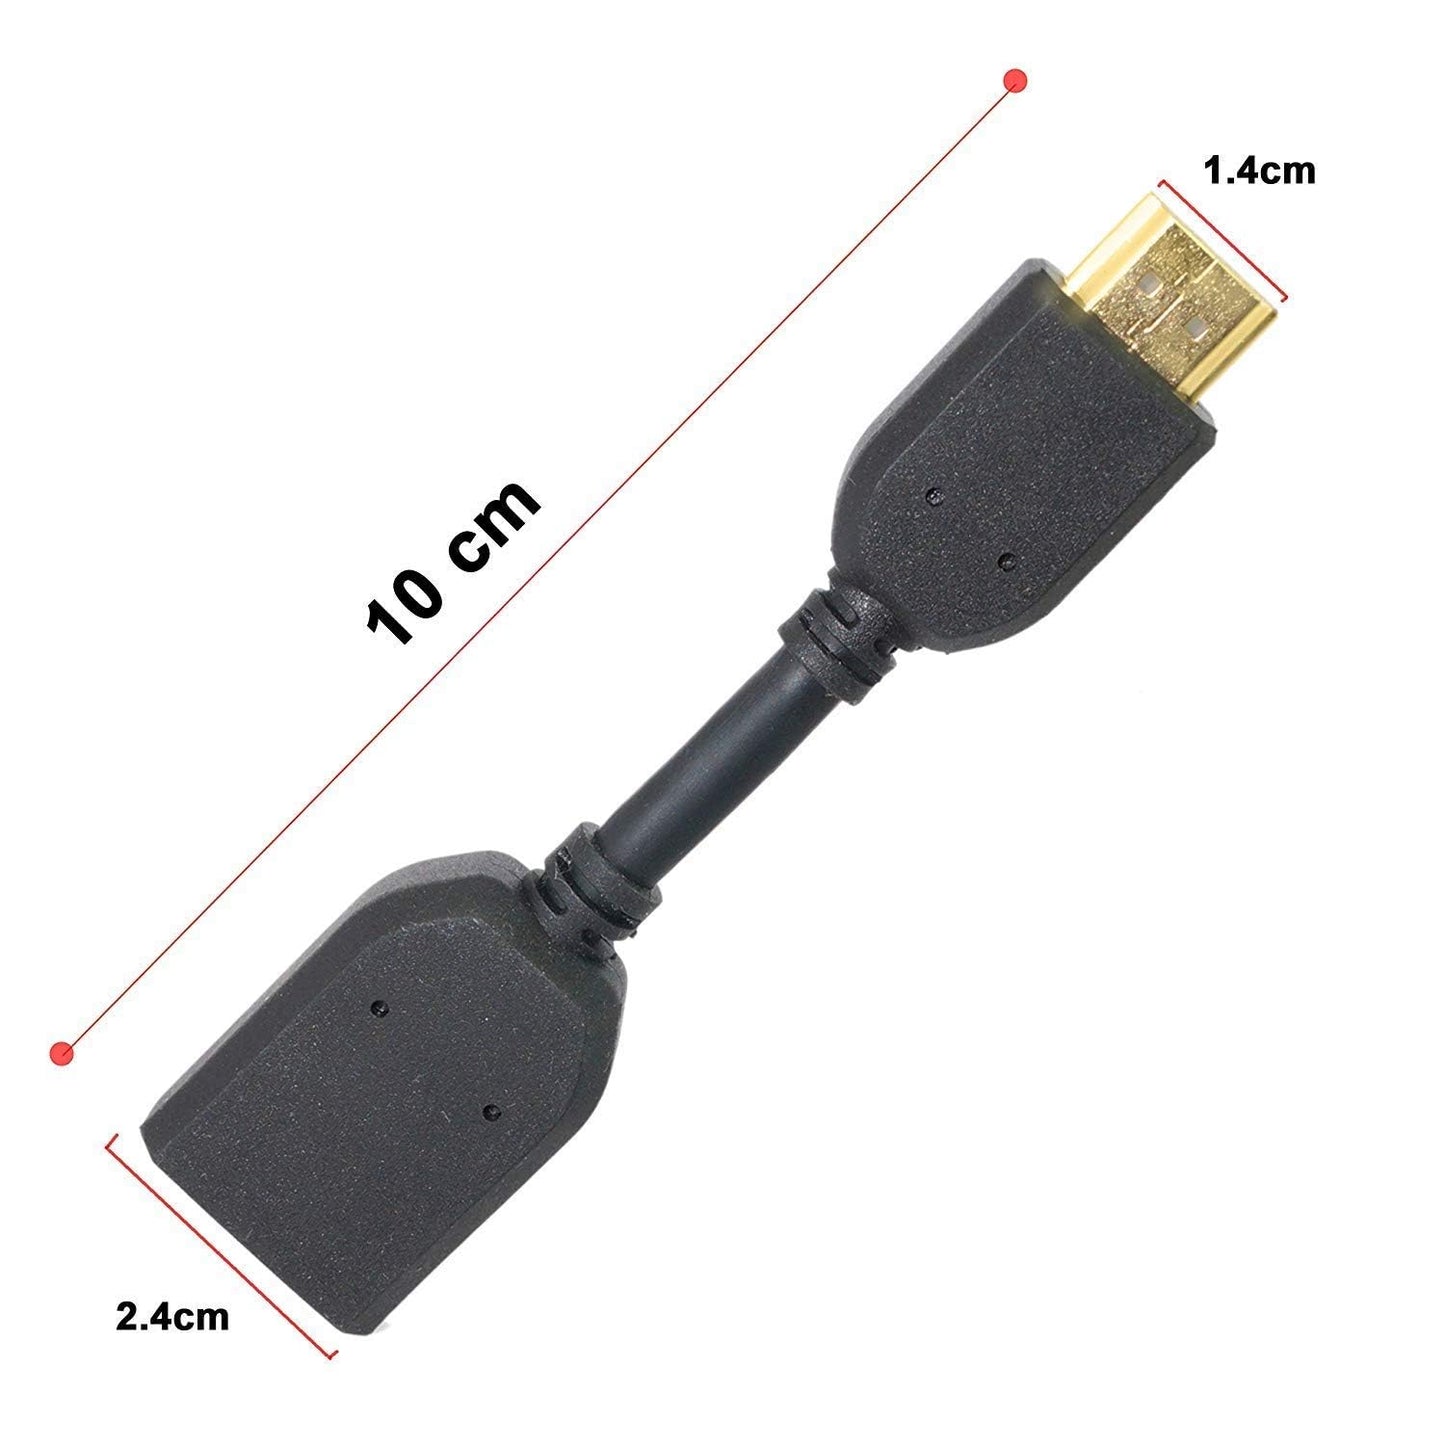 EYUVAA HDMI Male to Female Extension Cable Adapter for Computer, Desktop, Laptop, PC, Monitor, Projector, HDTV, Chromebook, Xbox and More (Black)